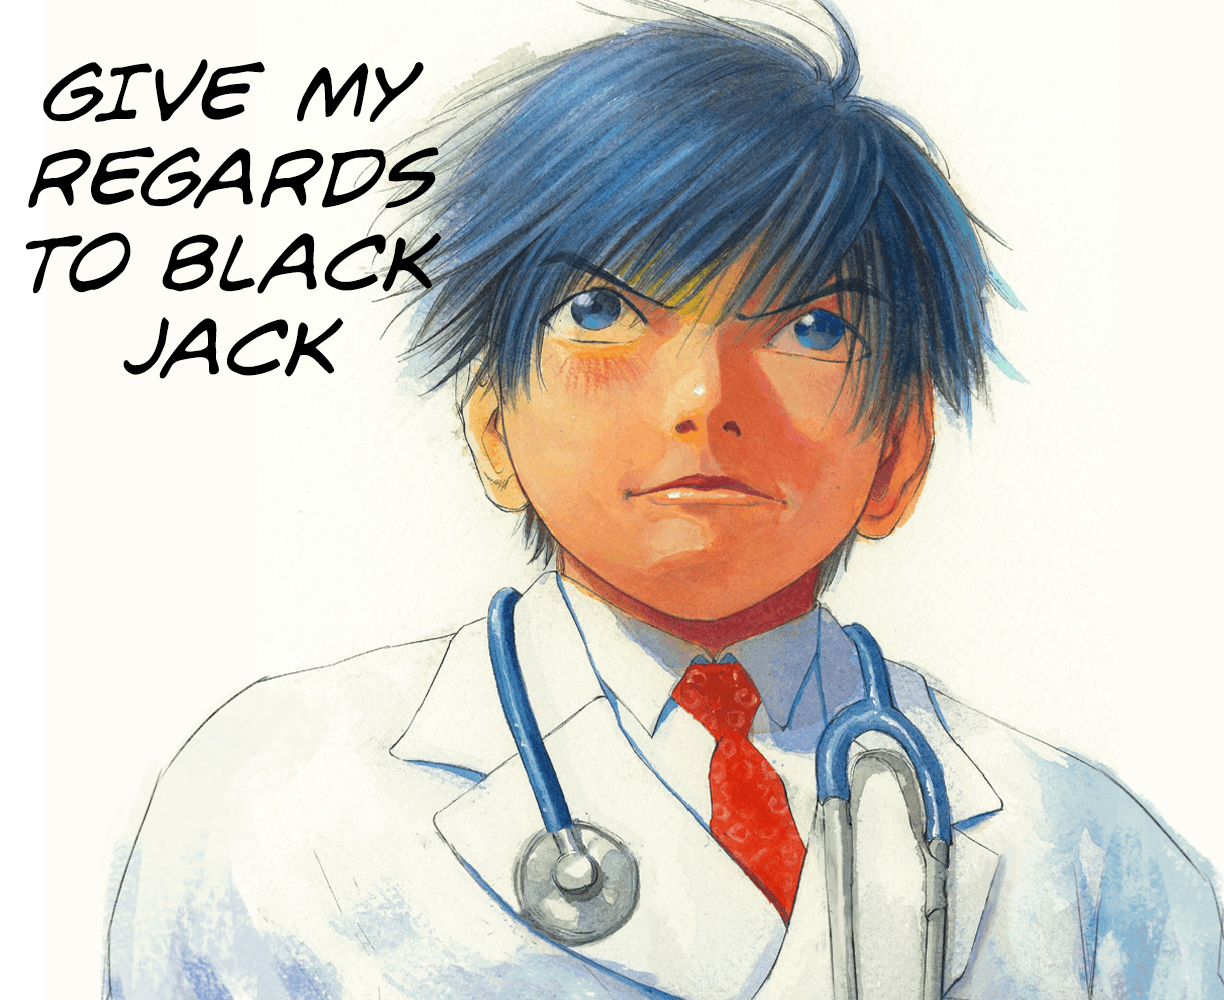 The cover art for the episode Let Me Tell You from the comics series Give My Regards to Black Jack, which is number 49 in the series